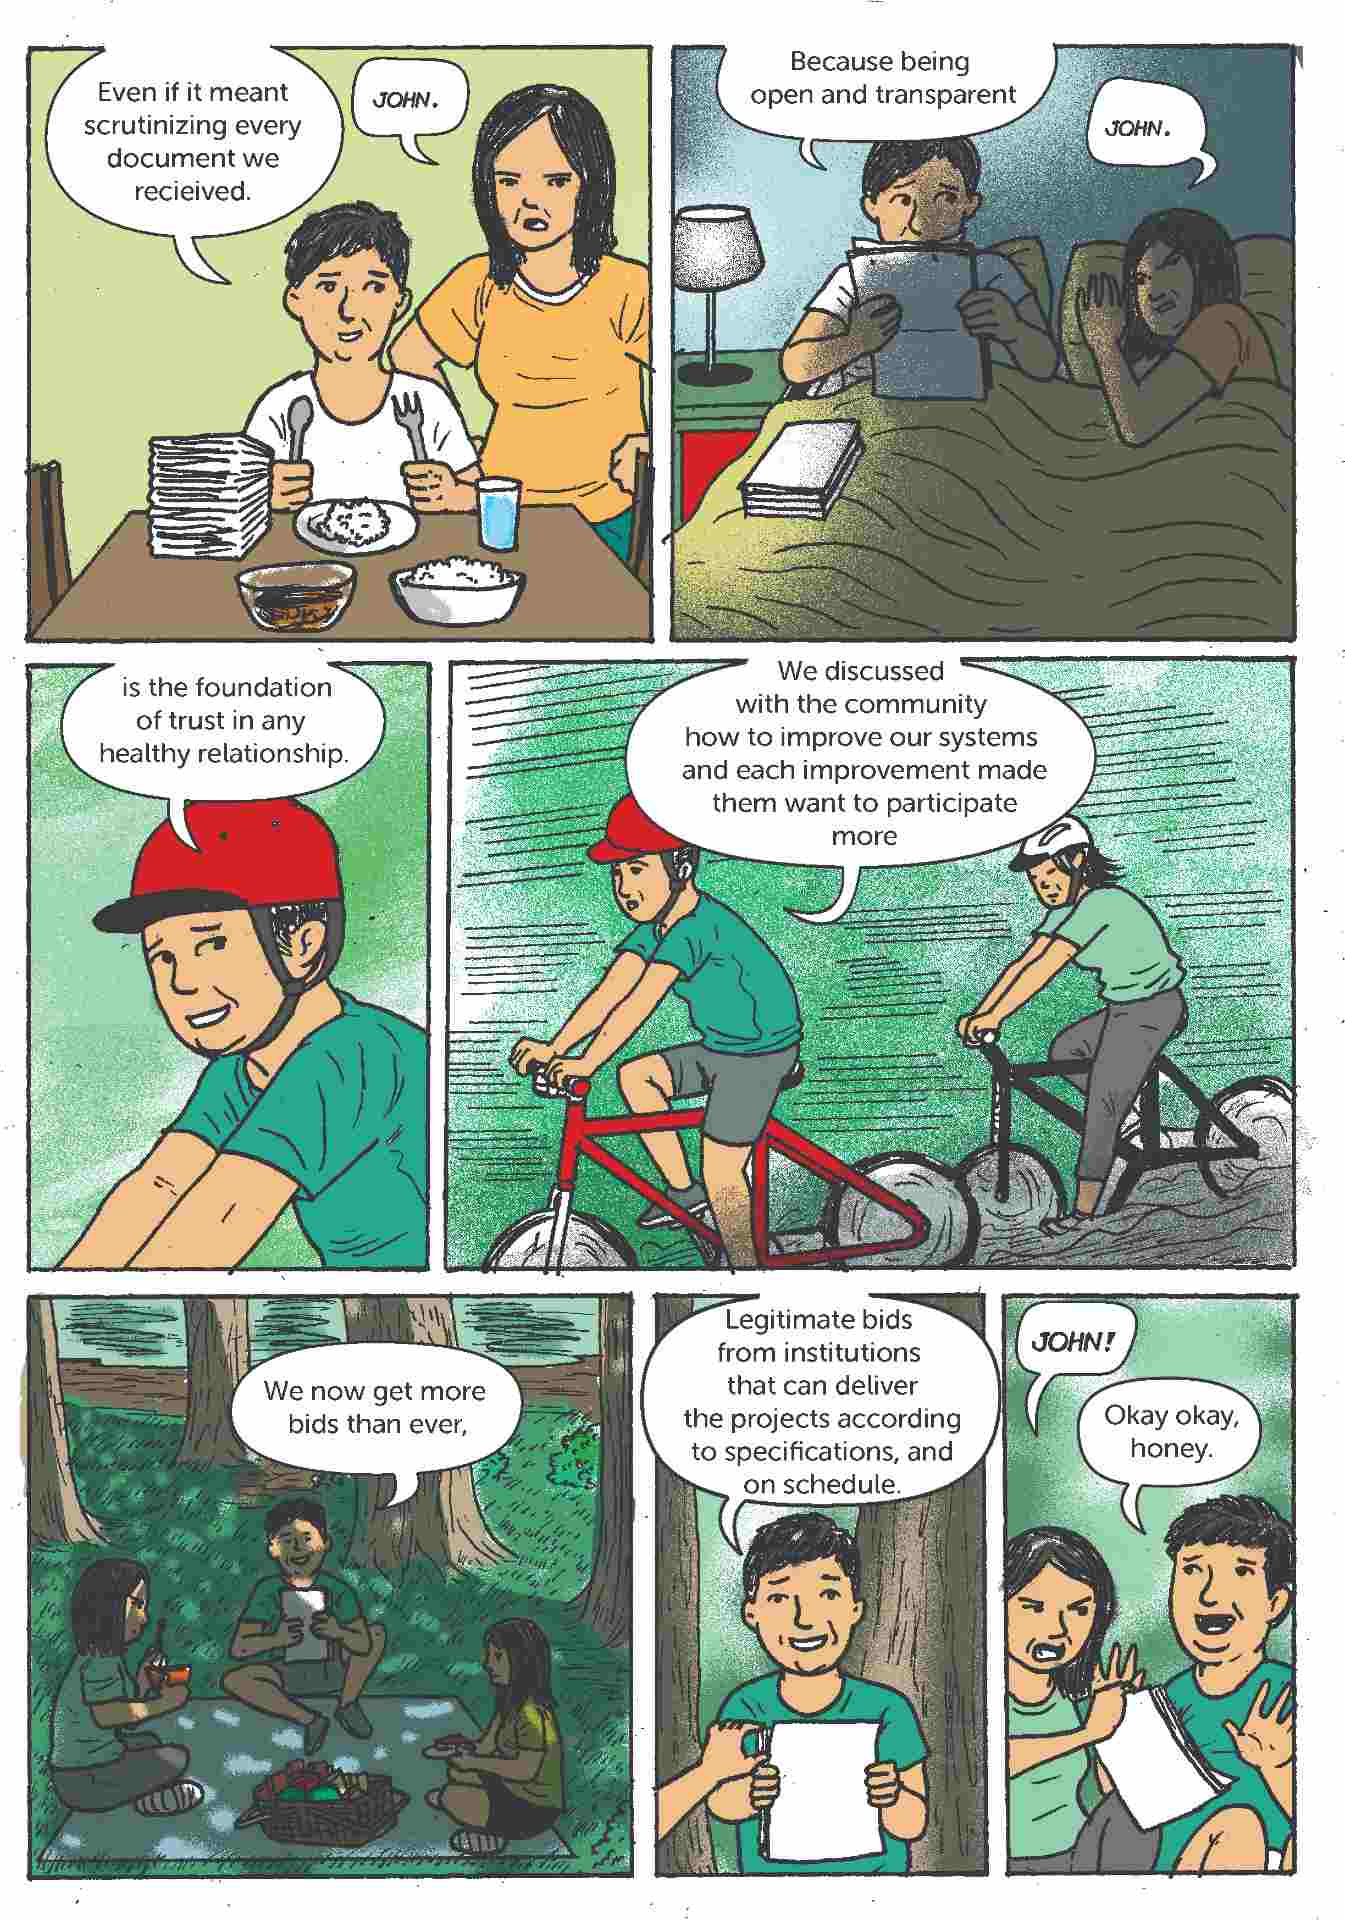 Comic strip about open contracting in the Philippines 5